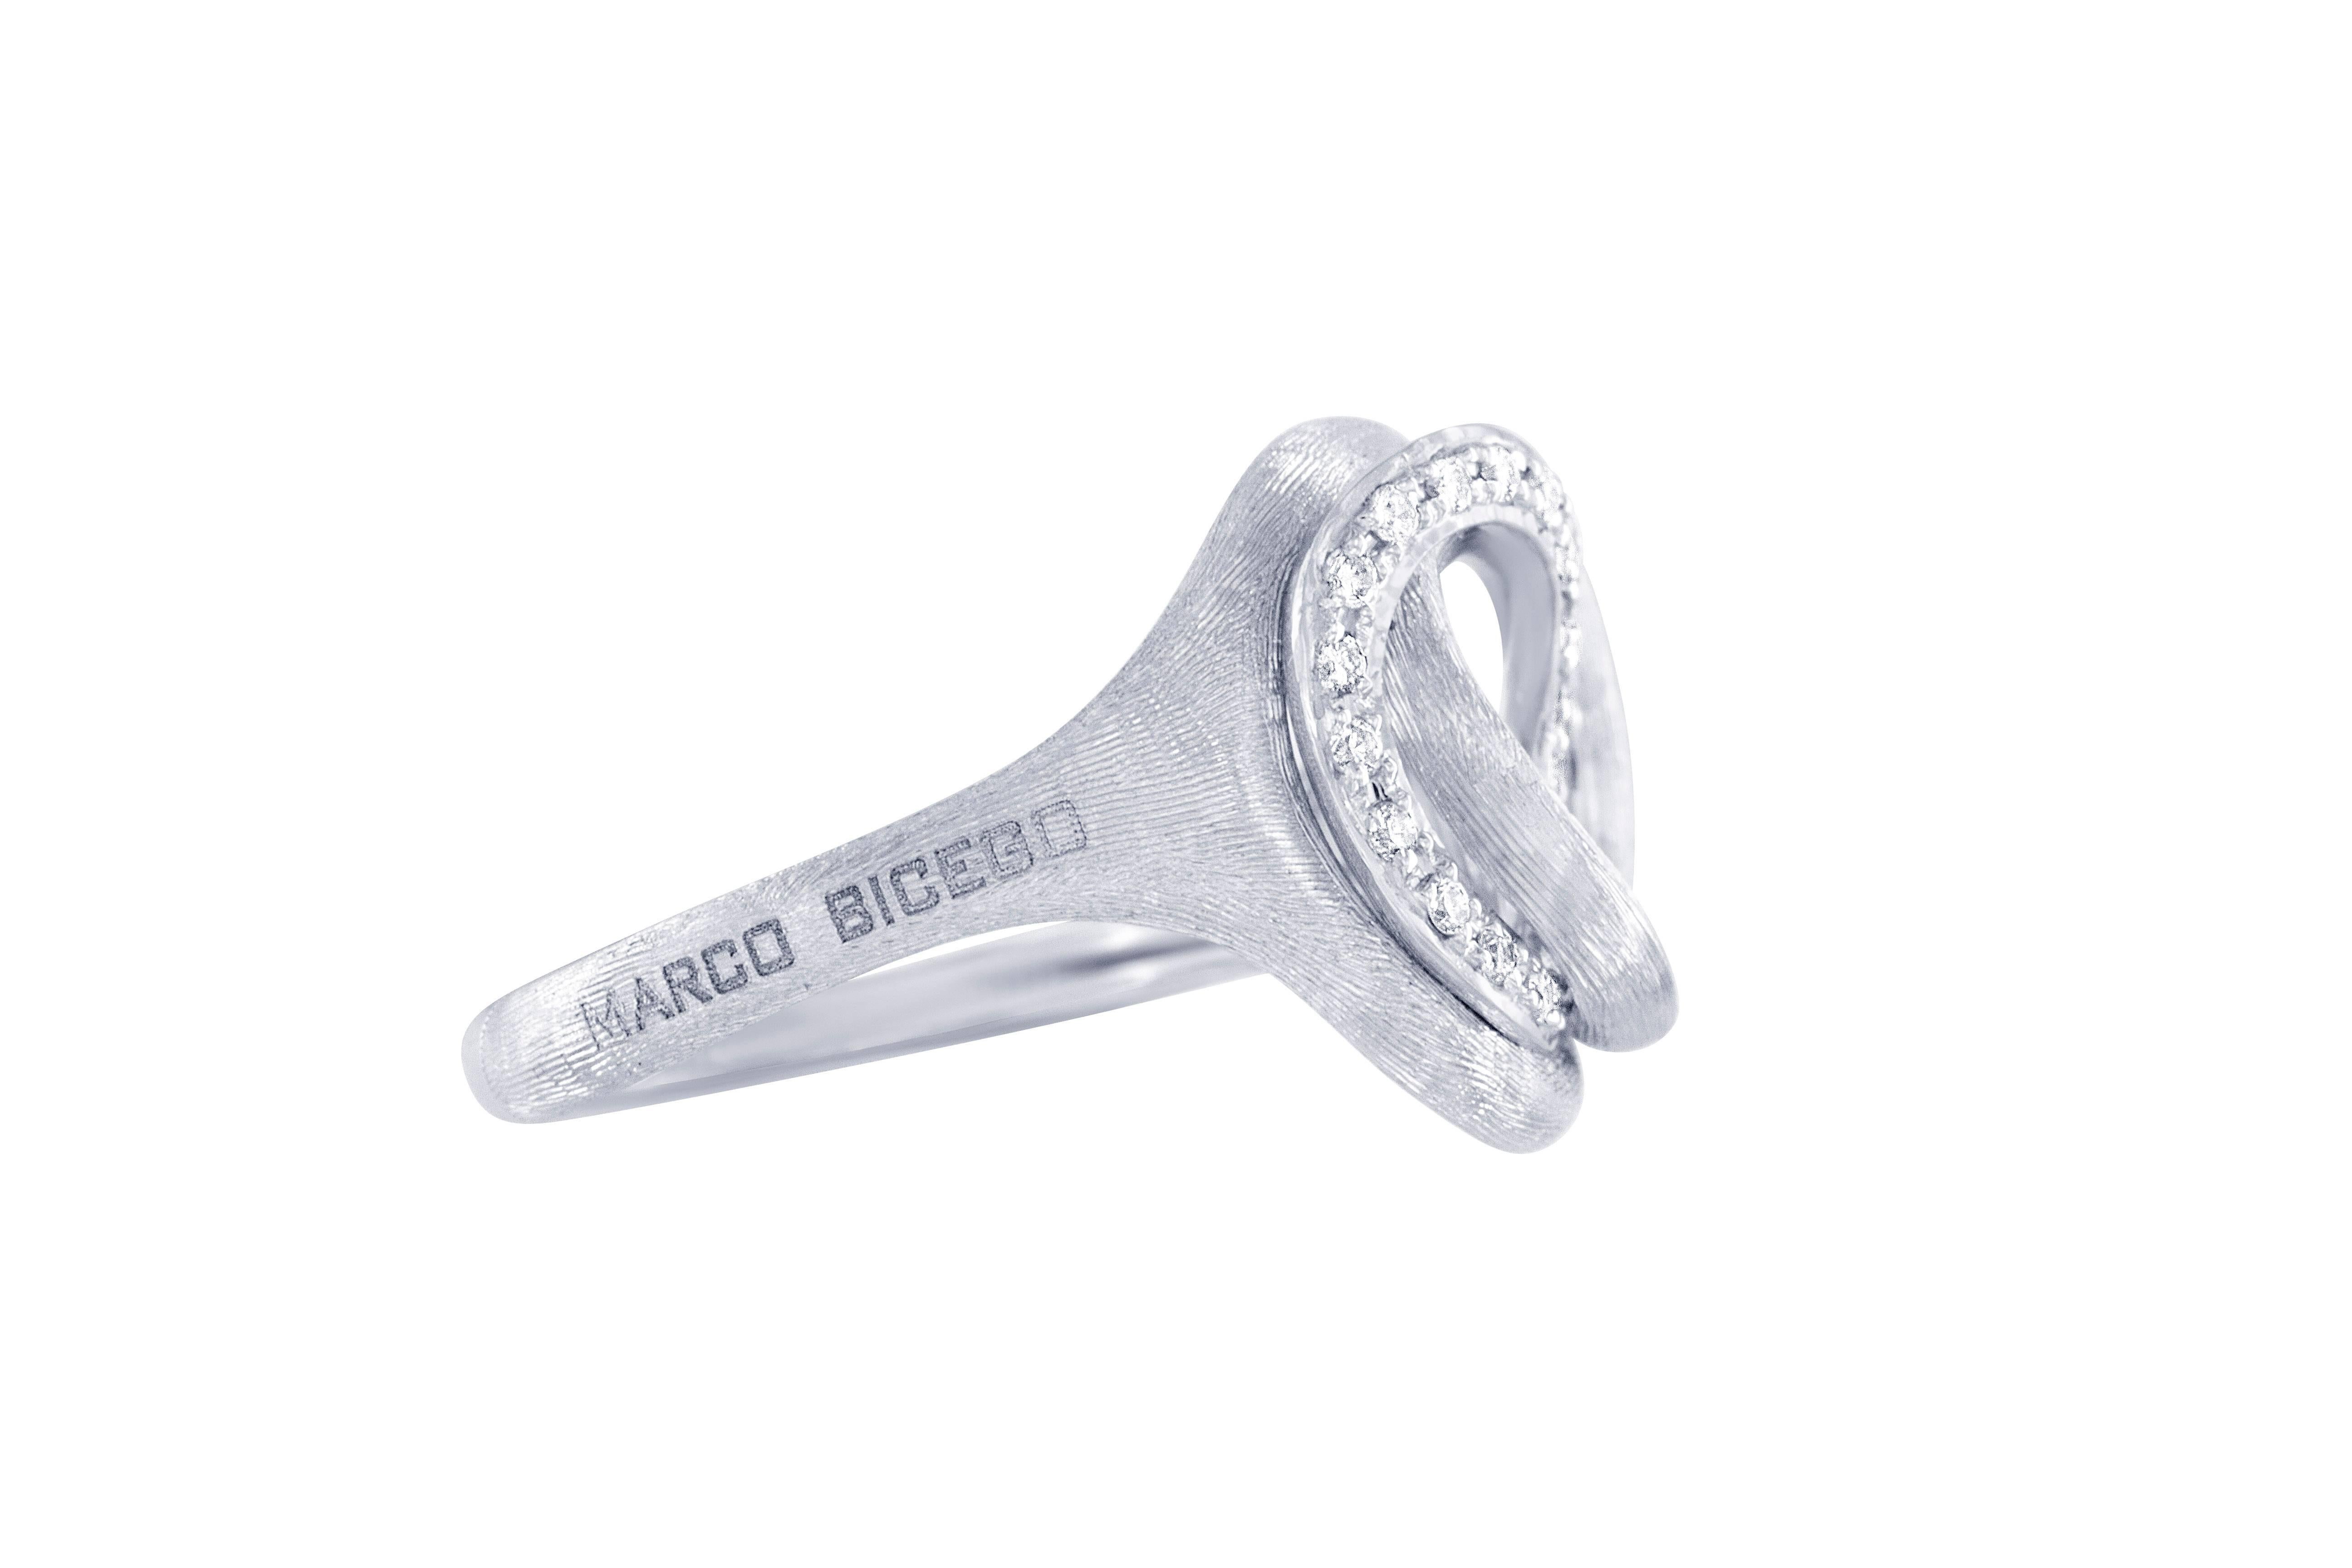 This subtly intricate Marco Bicego designer ring from the Jaipur collection consists of an 18 karat white gold hand engraved ring mounting, with 21- round brilliant cut diamonds weighing 0.14 carats total, having VS clarity and G color. Current size